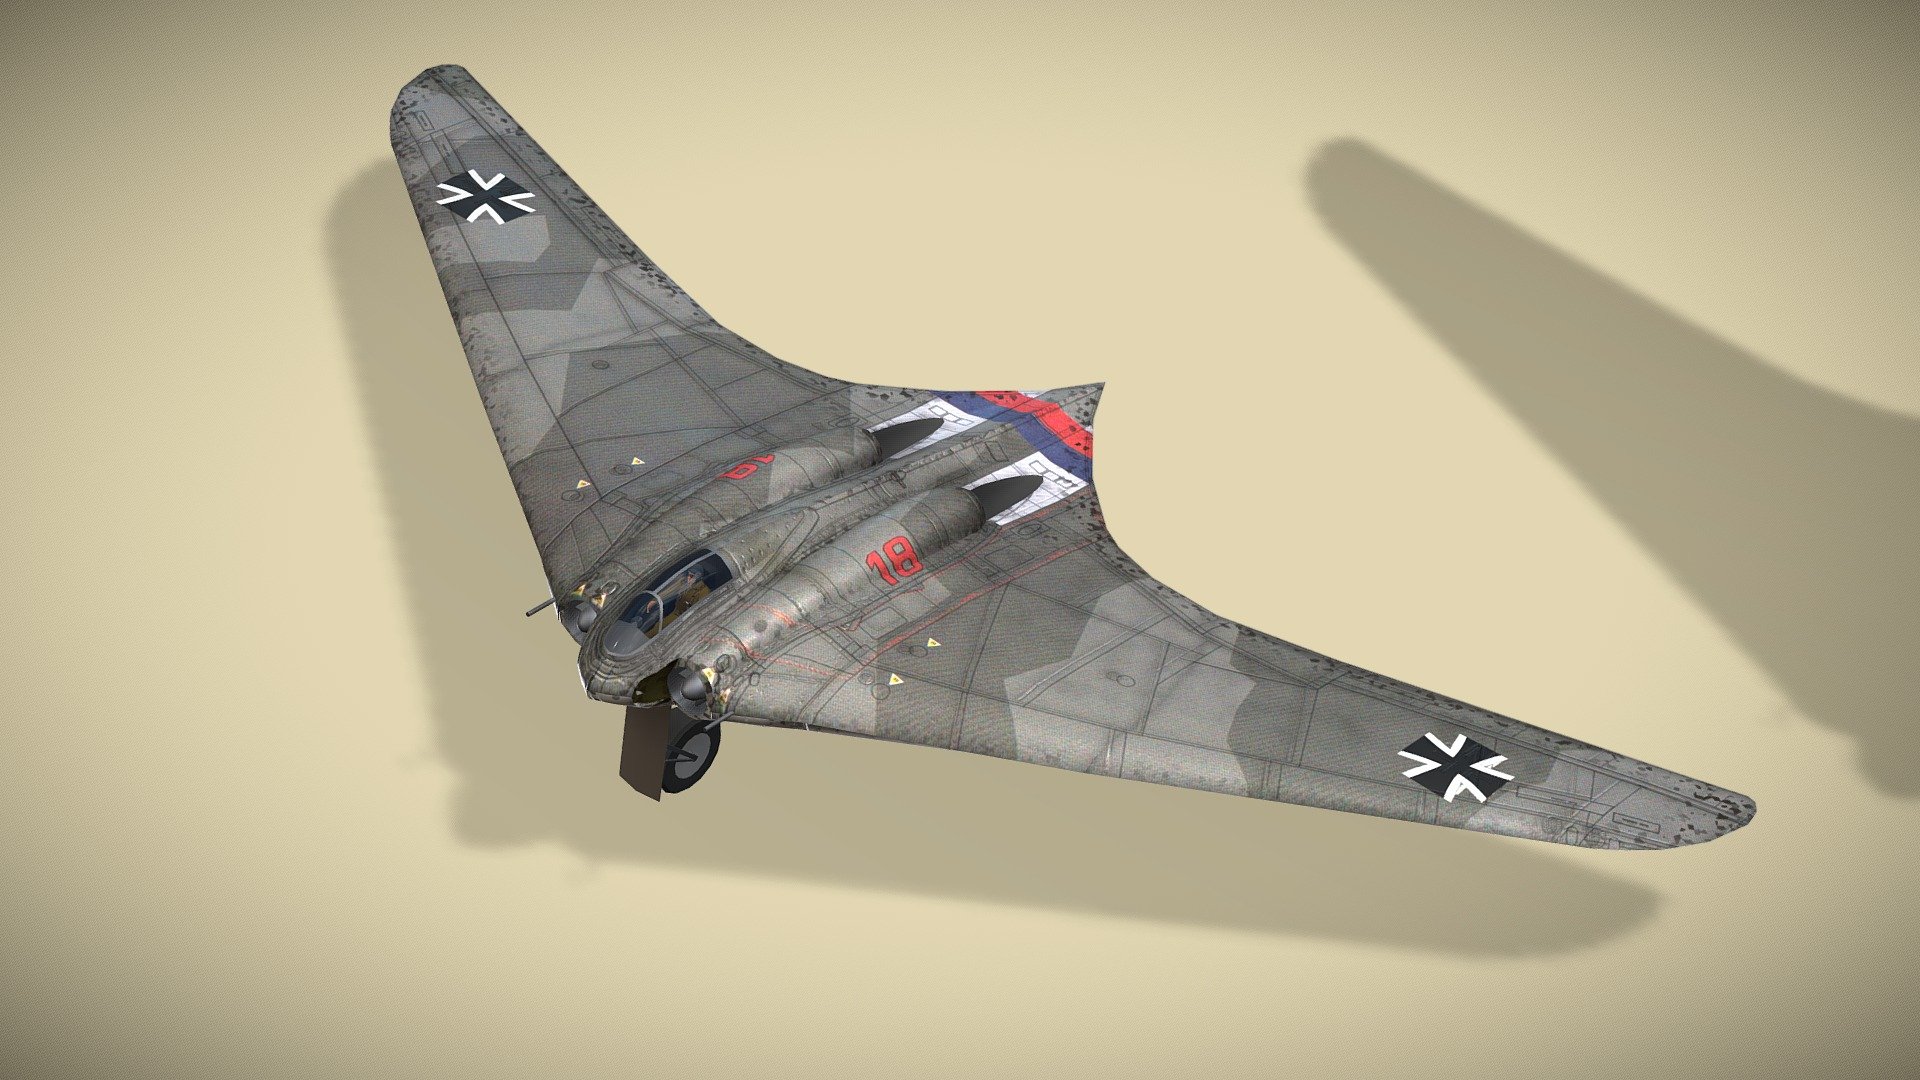 Horten Ho 229

Lowpoly model of german concept fighter/bomber plane from WW2



The Horten Ho 229 was a German prototype fighter/bomber initially designed by Horten brothers to be built by Gothaer Waggonfabrik late in World War II. It was the first flying wing to be powered by jet engines.

The design was a response to H. Göring's call for light bomber designs capable of meeting the &ldquo;3×1000